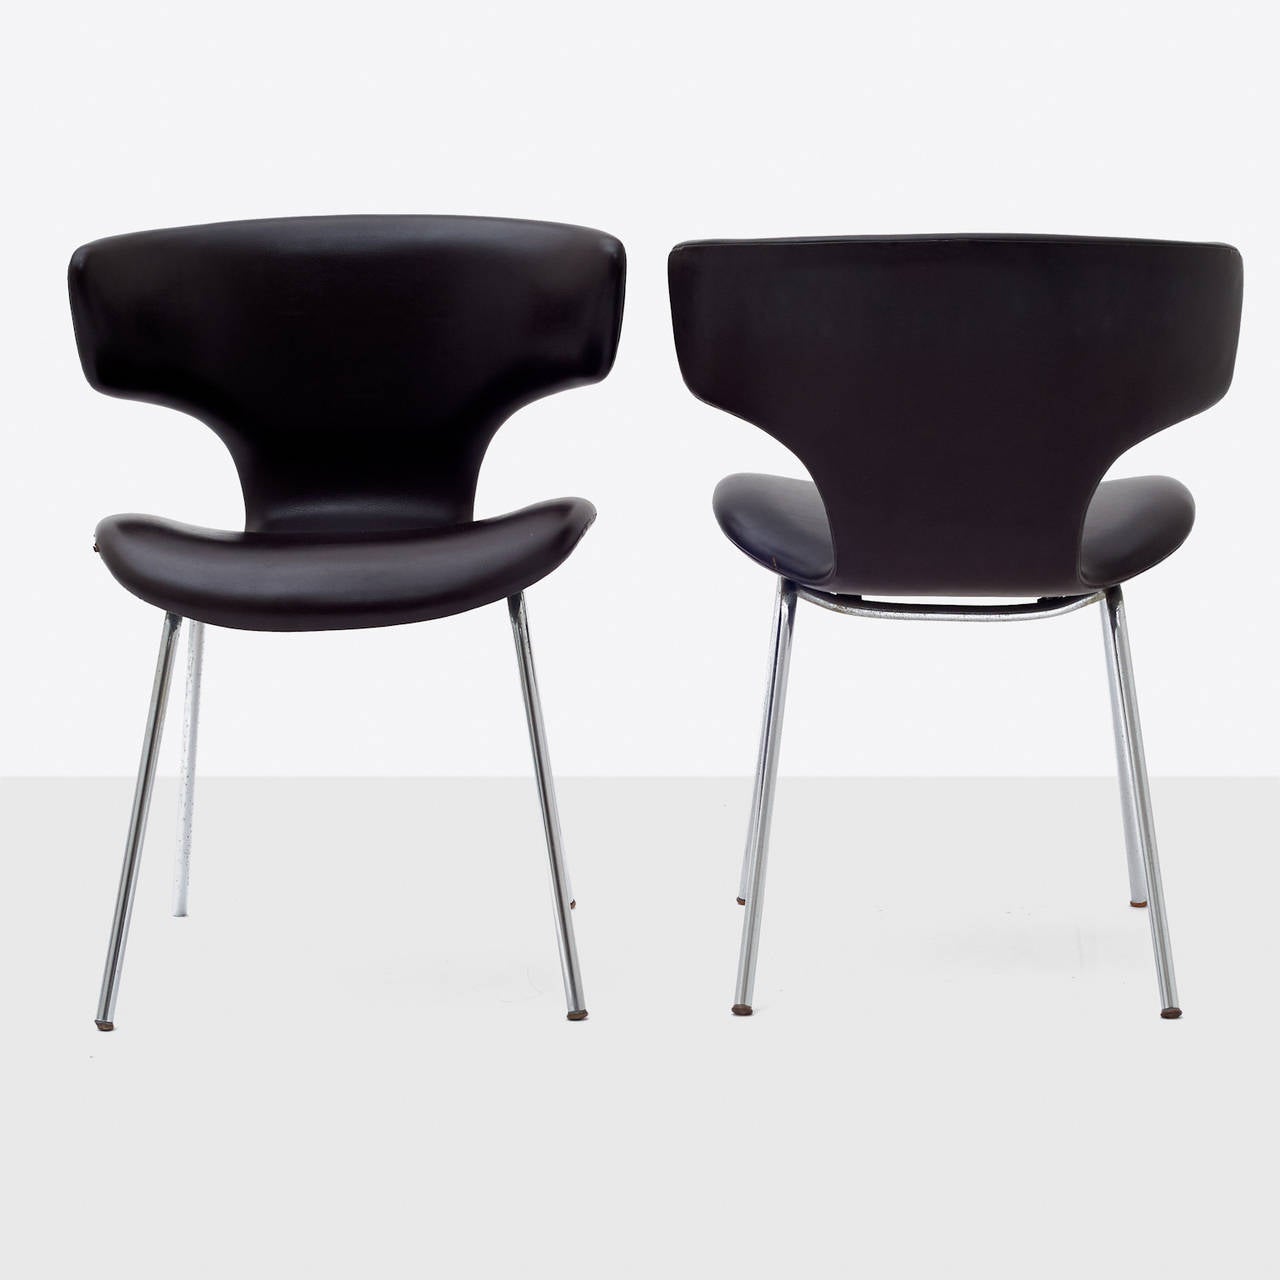 A pair of chairs by Isamu Kenmochi upholstered in dark brown
leather with chrome plated steel legs.